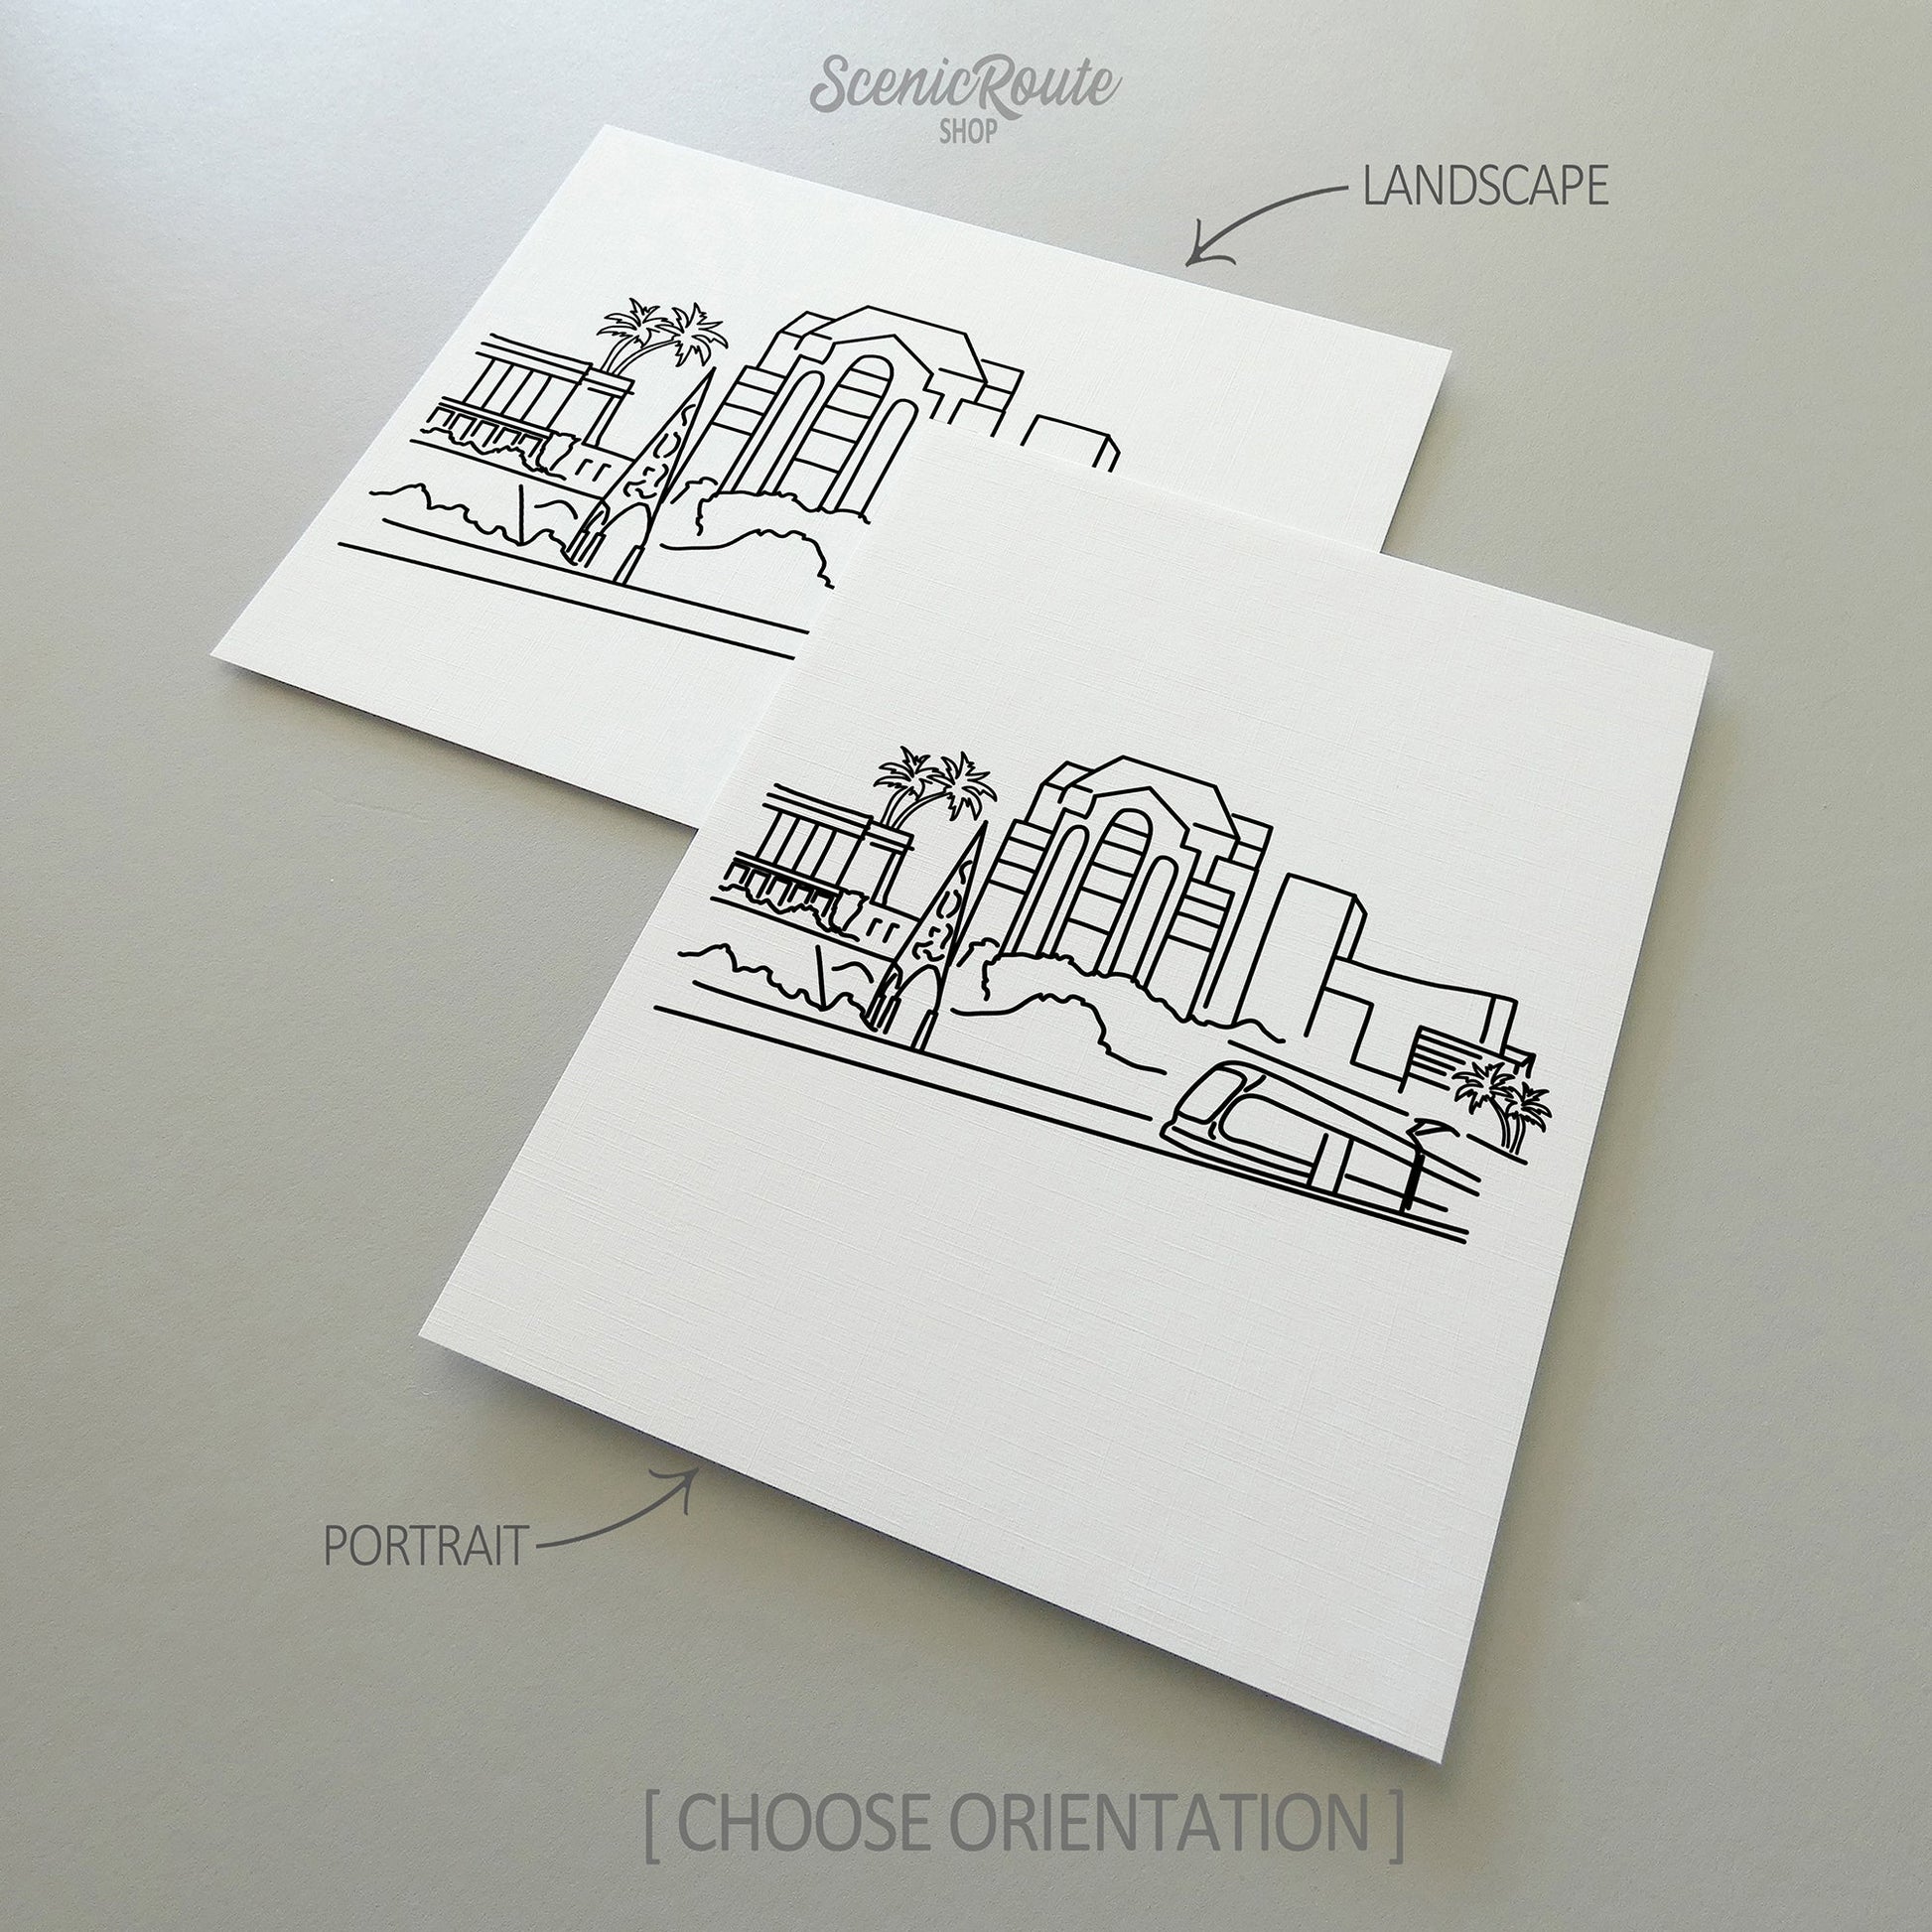 Two line art drawings of the Mesa Skyline on white linen paper with a gray background.  The pieces are shown in portrait and landscape orientation for the available art print options.